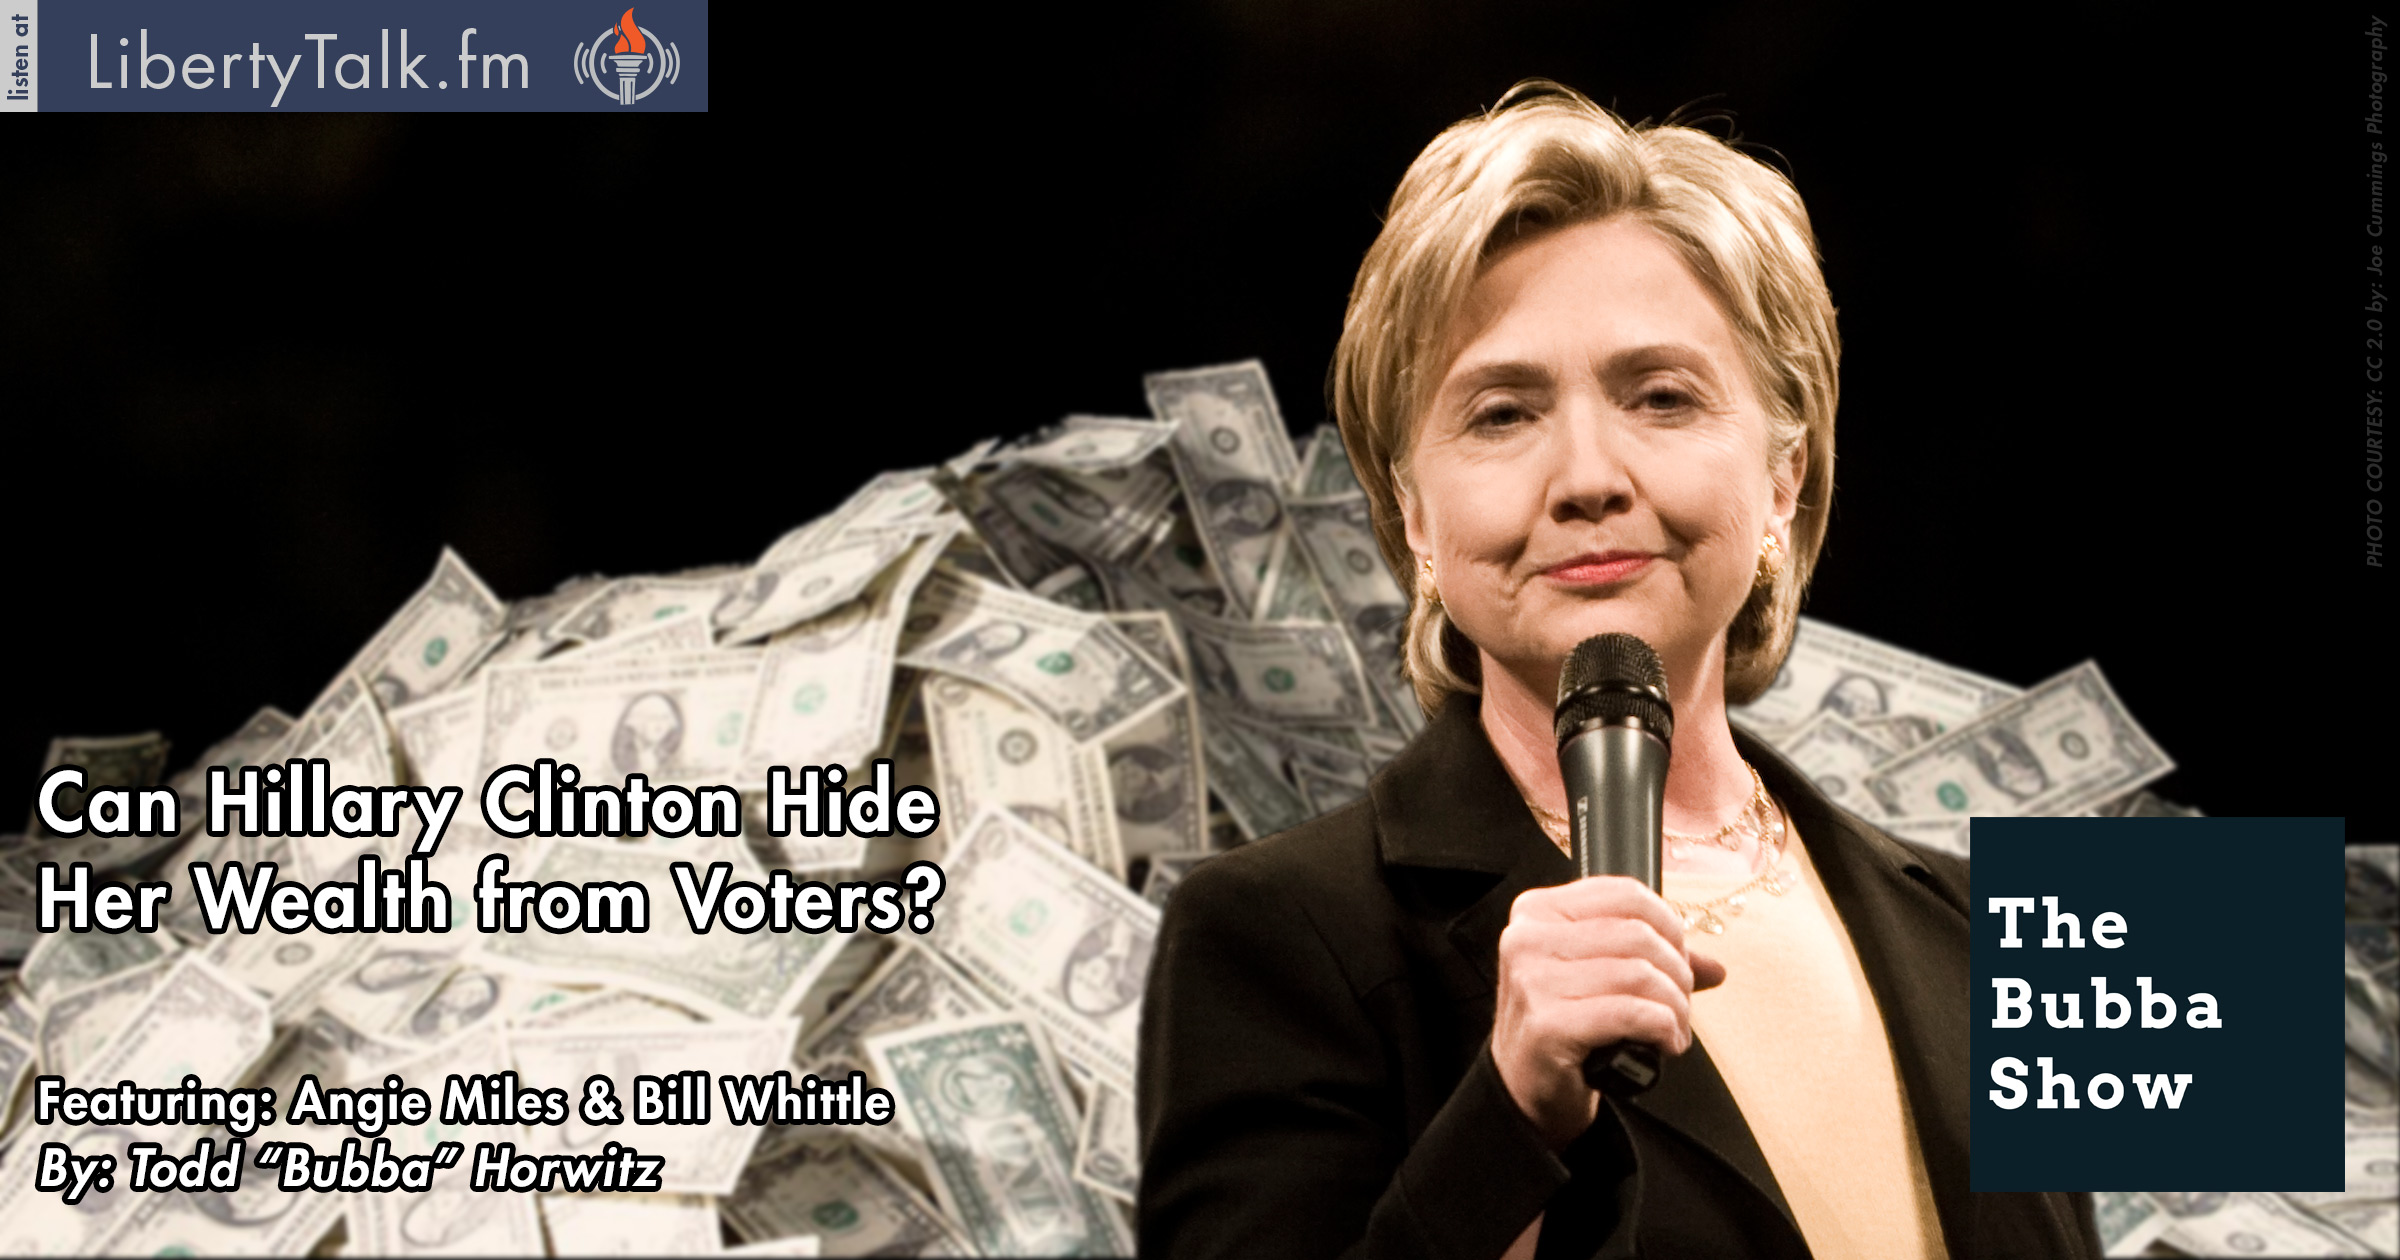 Hillary Clinton Hide Wealth Voters FEATURED